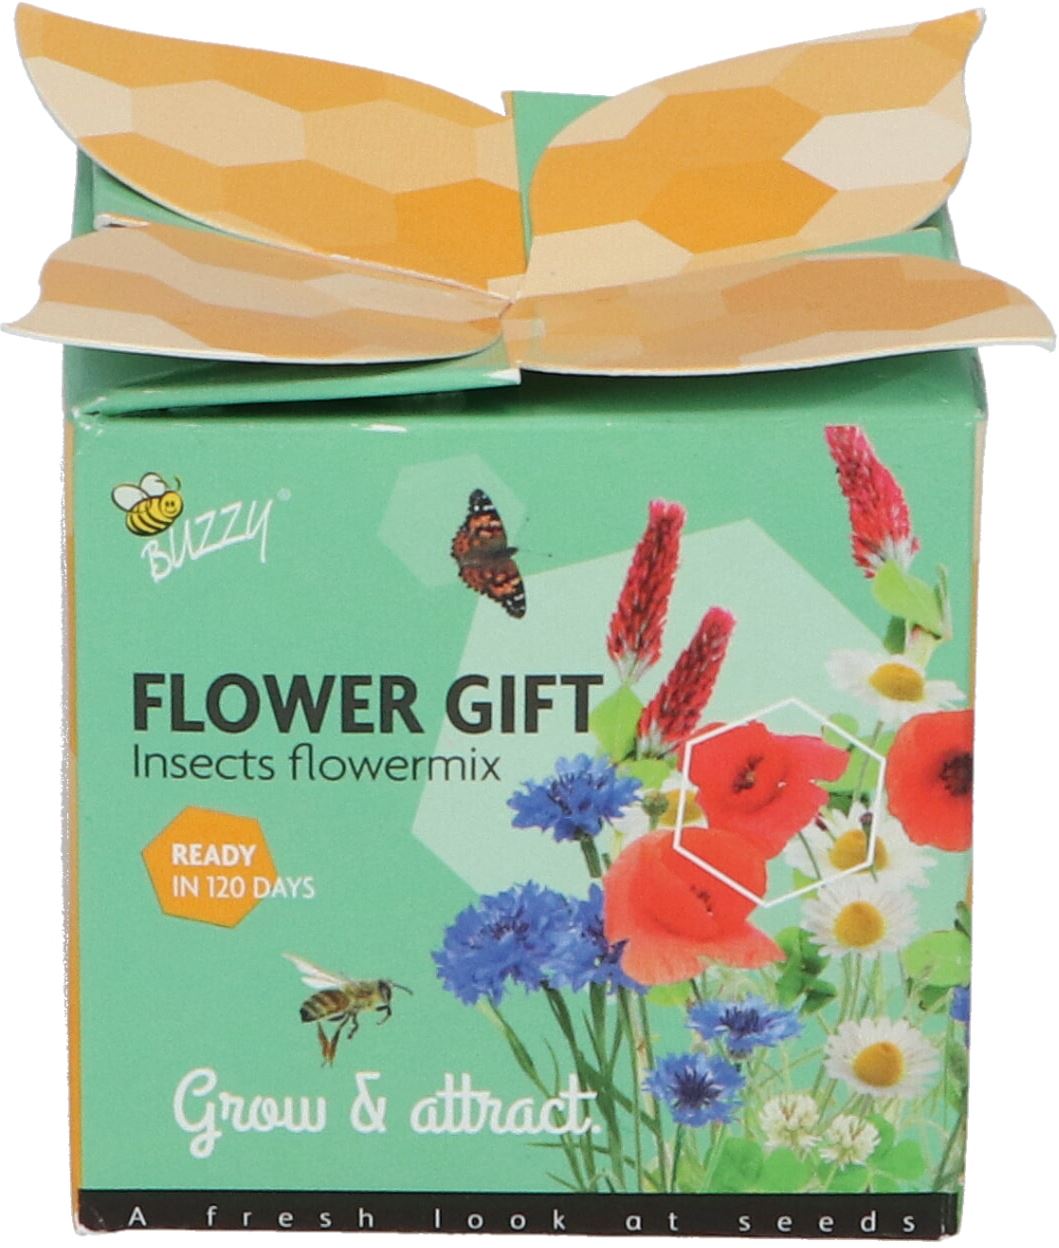 Buzzy-Display-Flower-Gift-Insect-Flower-mix-48-